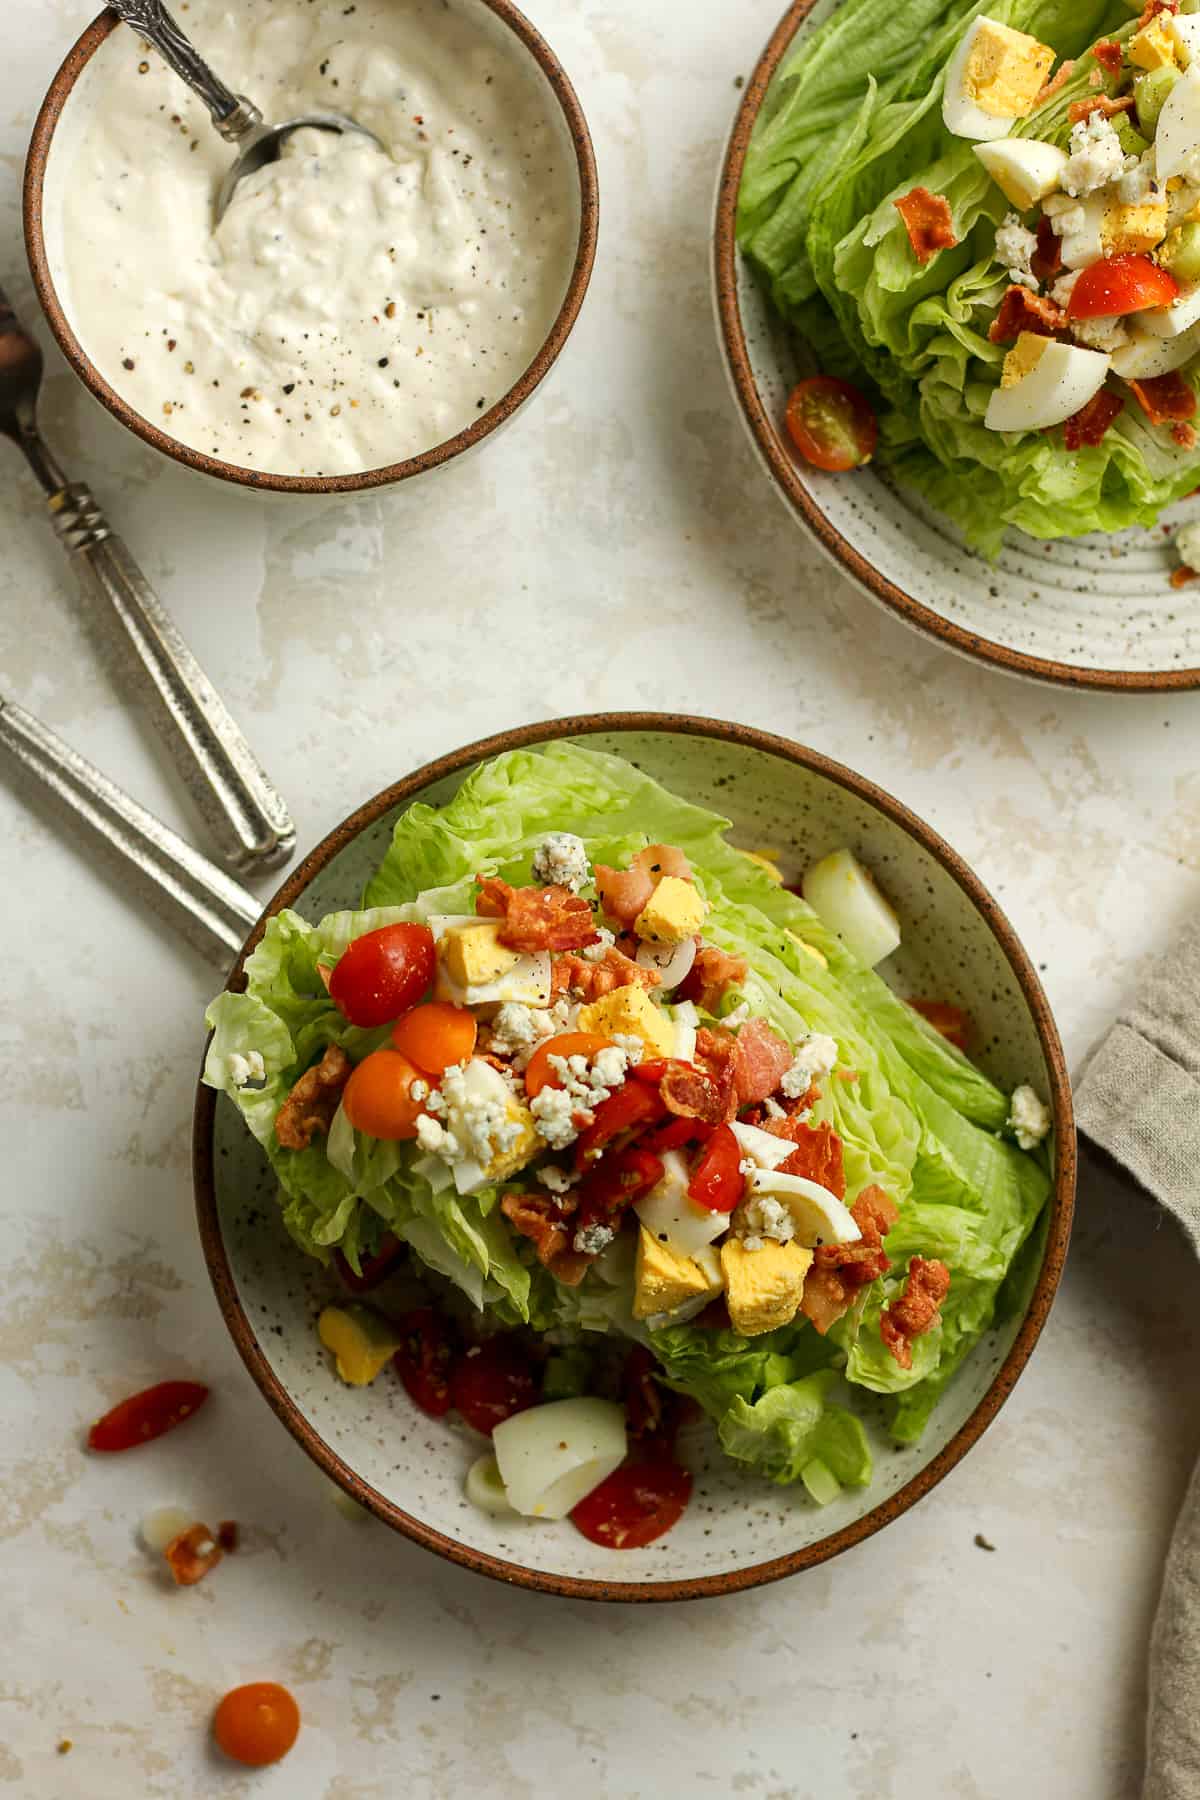 Two bowls of wedge salad with a bowl of dressing next to them.